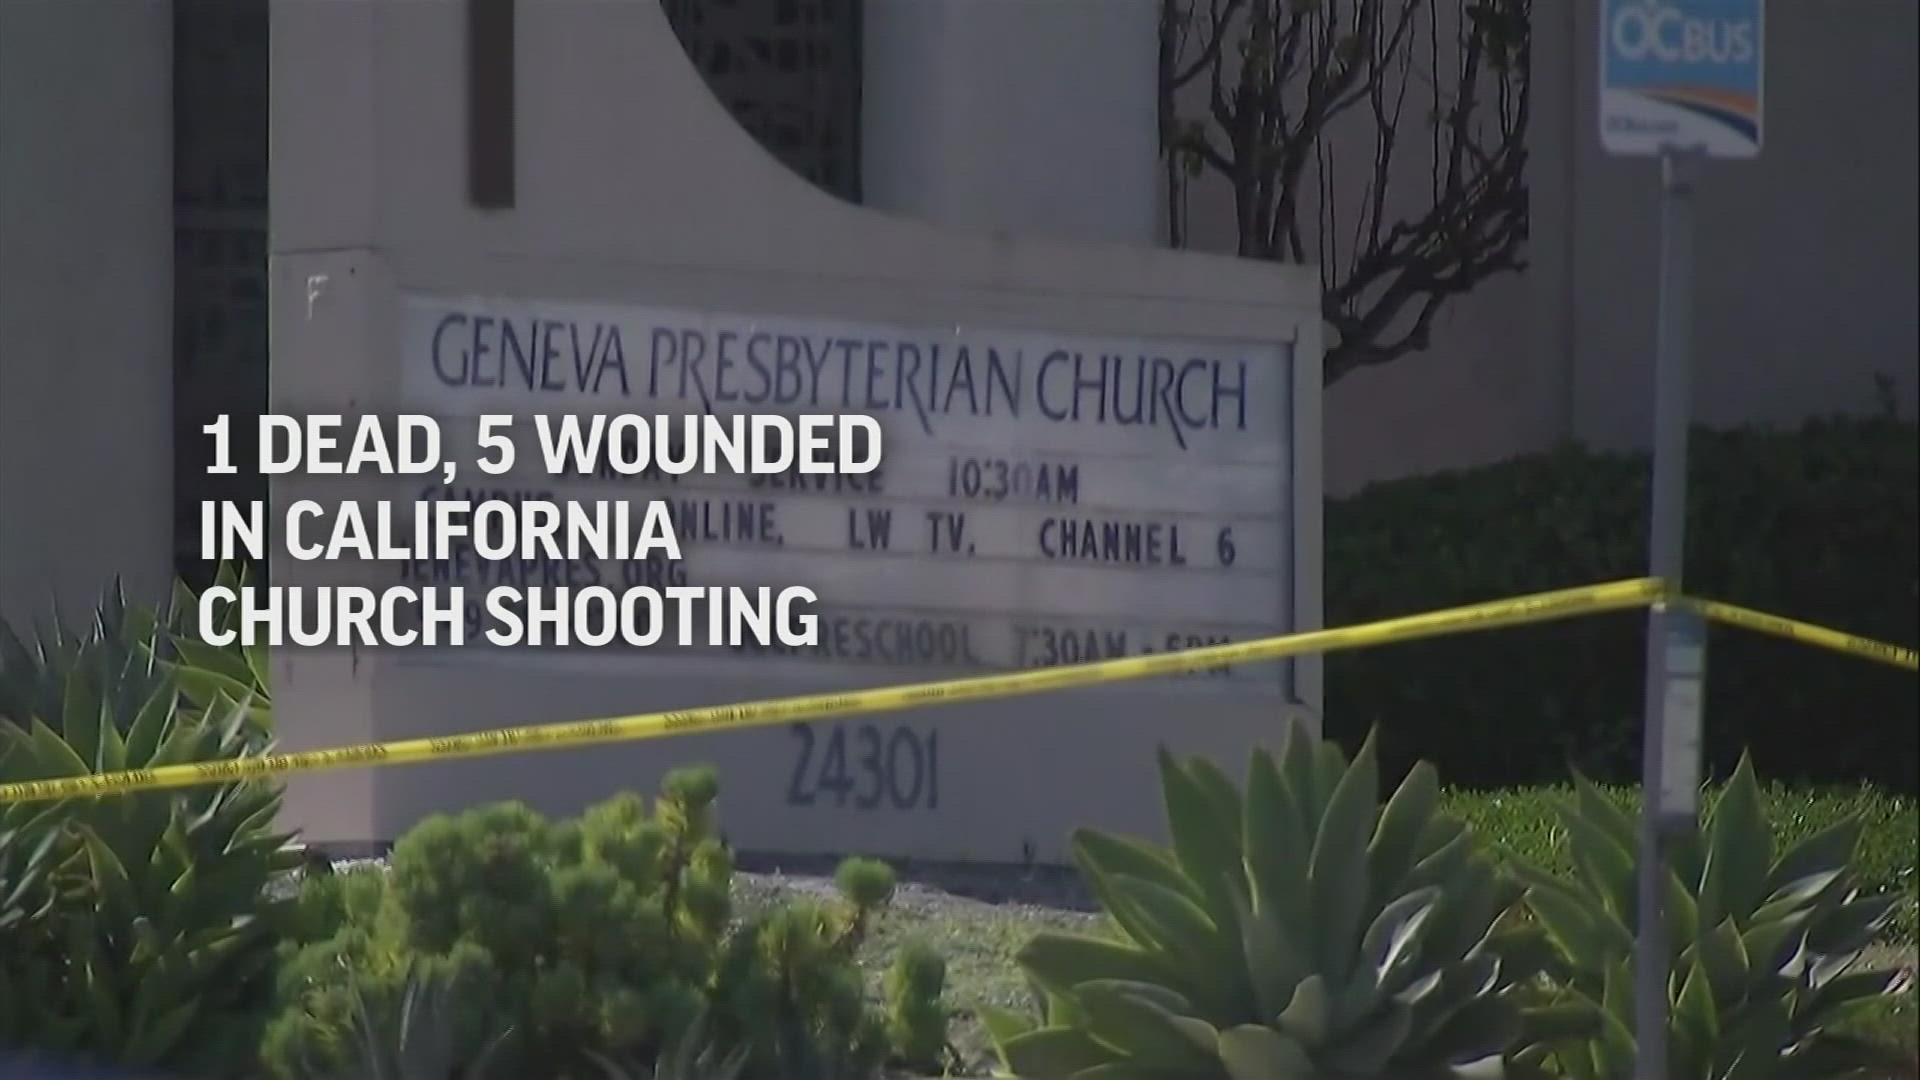 A man opened fire during a lunch reception at a Southern California church on Sunday, killing one person and wounding five senior citizens.